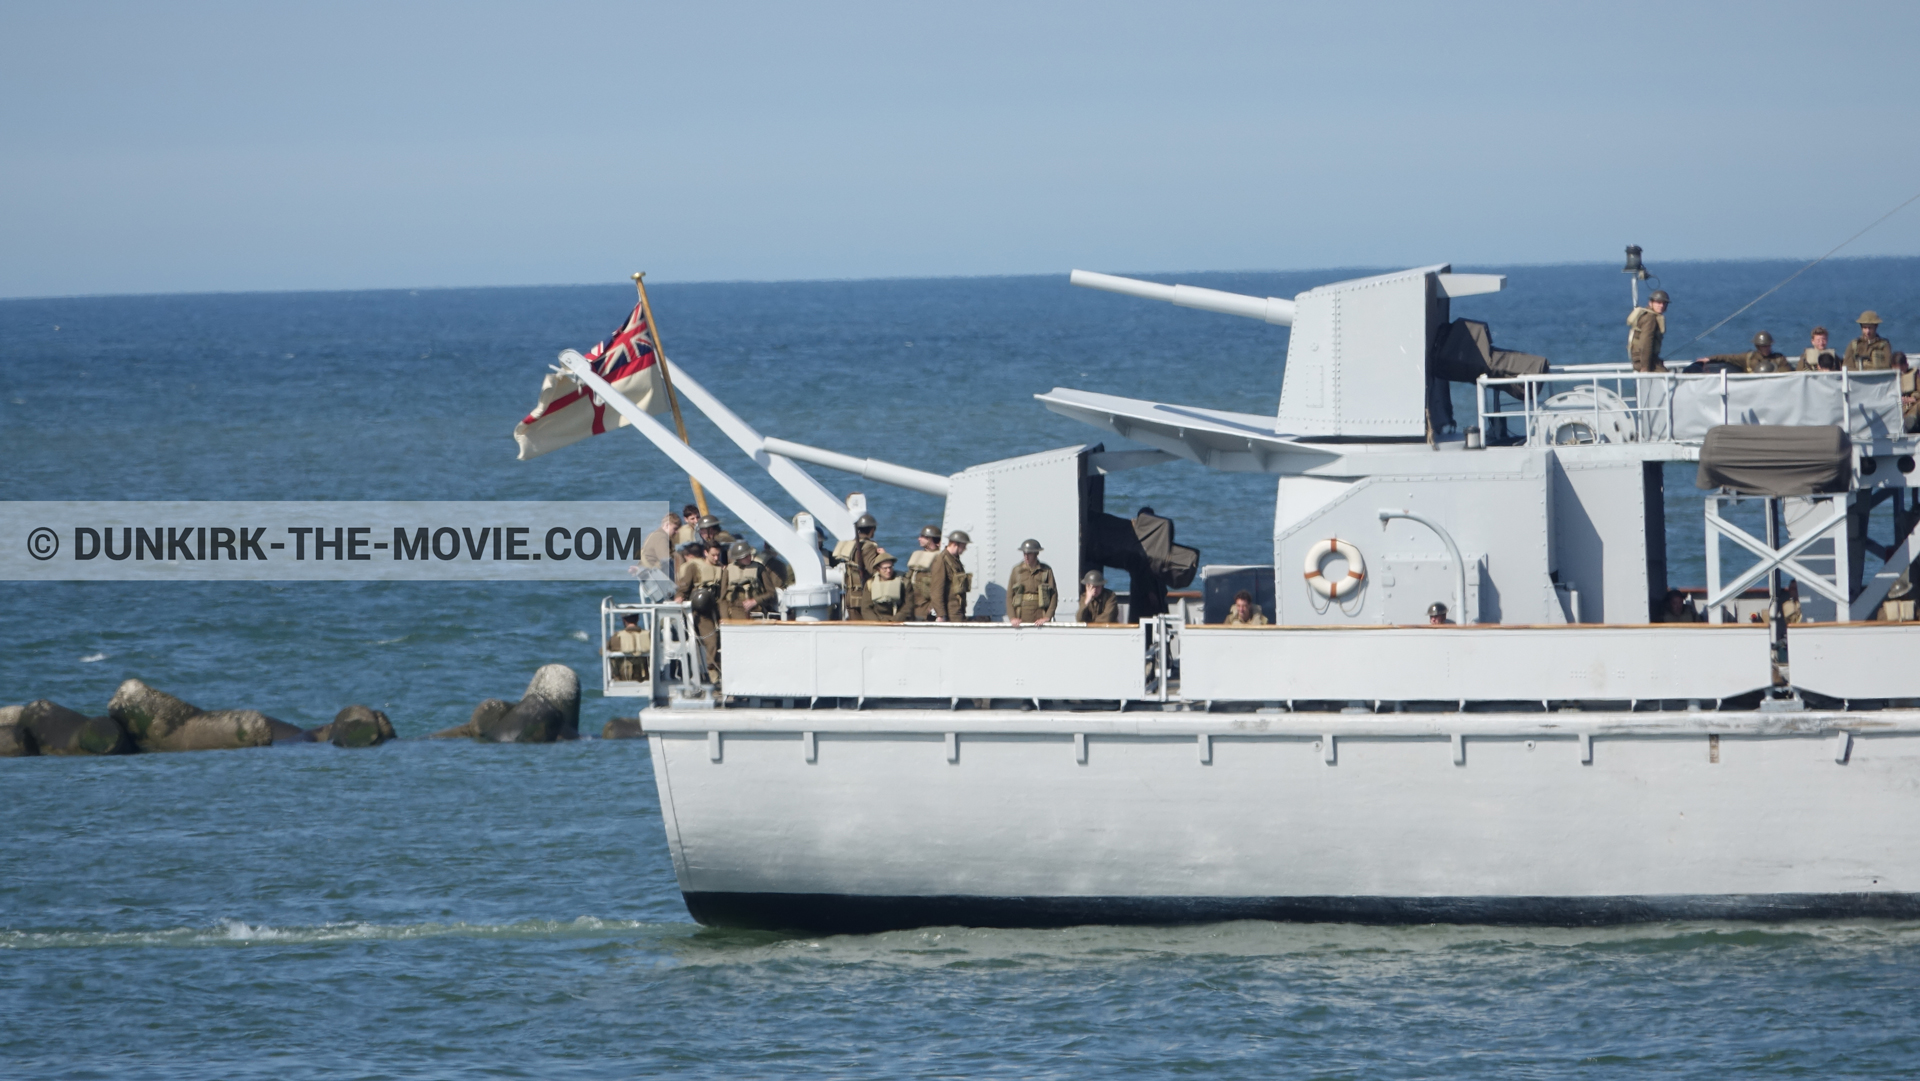 Picture with blue sky, F34 - Hr.Ms. Sittard, supernumeraries, calm sea,  from behind the scene of the Dunkirk movie by Nolan